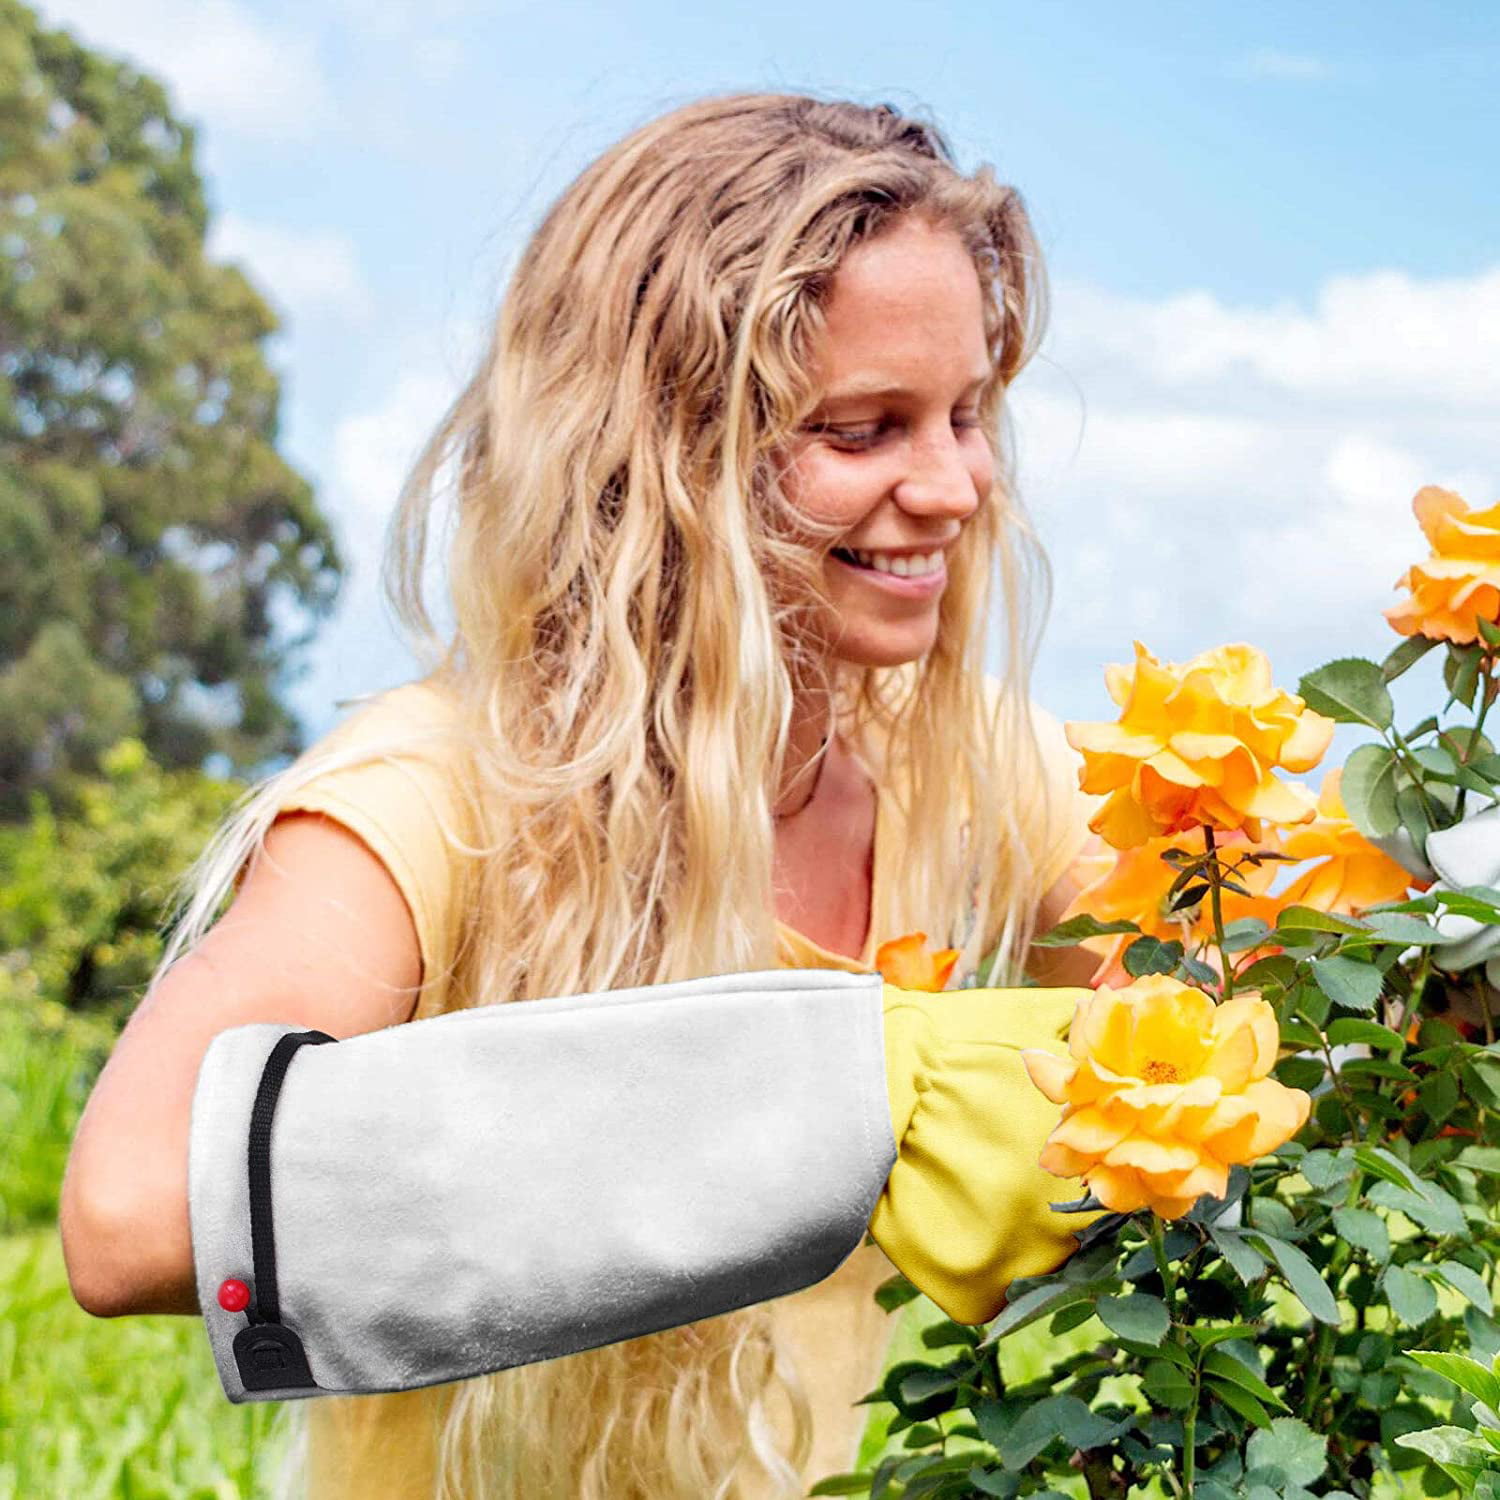 Rose Pruning Thorn Proof Goatskin Gloves With Long Cow Leather Gauntlet Gardening Gloves For Women and Men M 